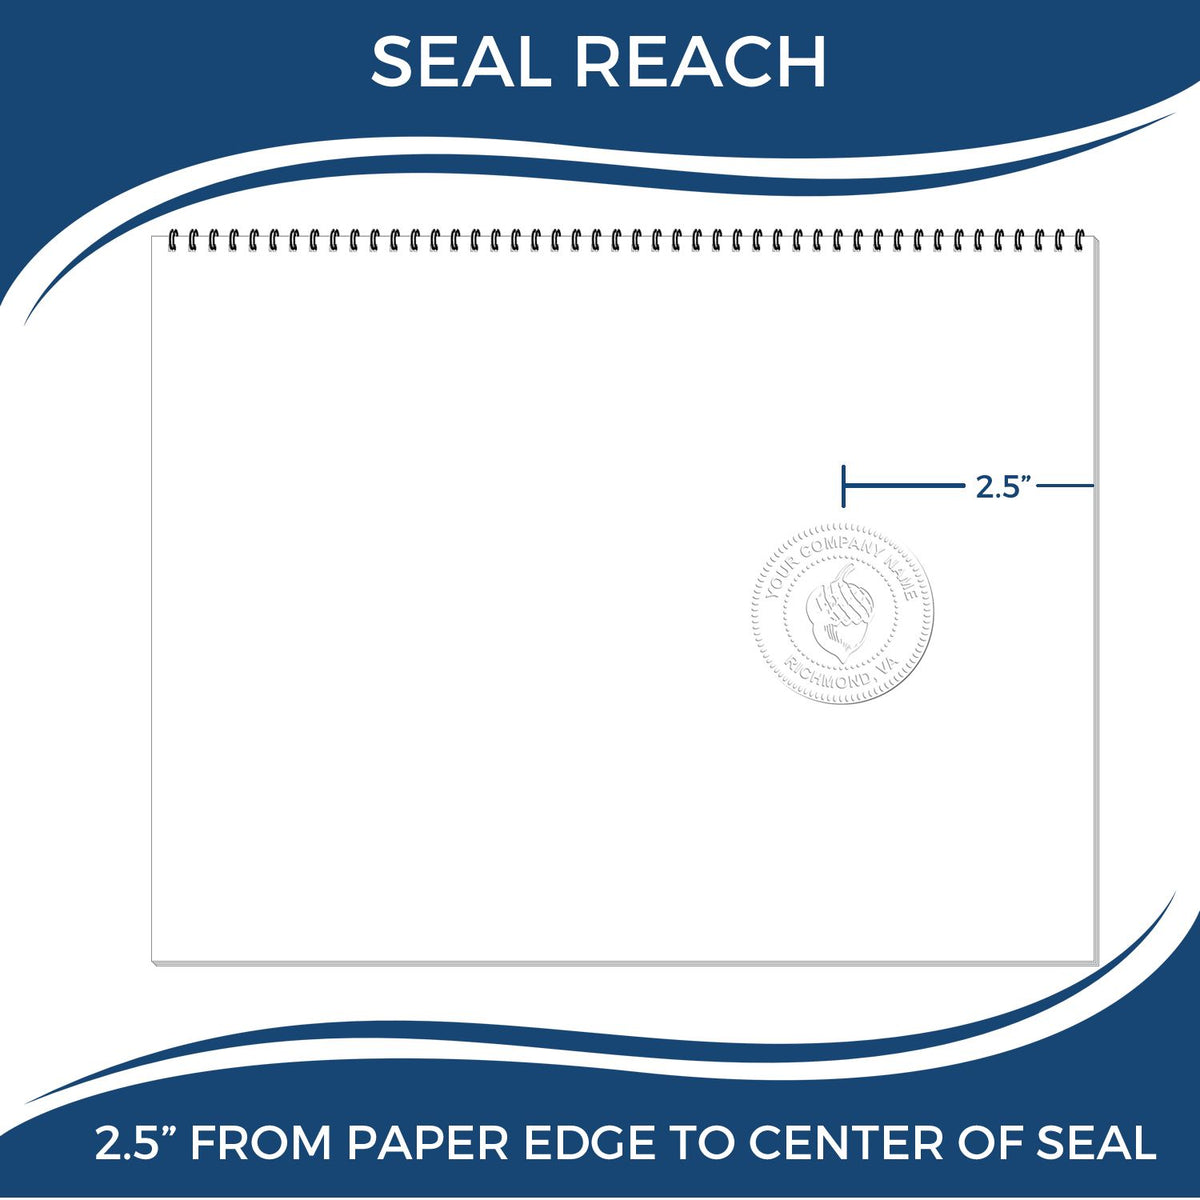 An infographic showing the seal reach which is represented by a ruler and a miniature seal image of the Heavy Duty Cast Iron New Mexico Engineer Seal Embosser